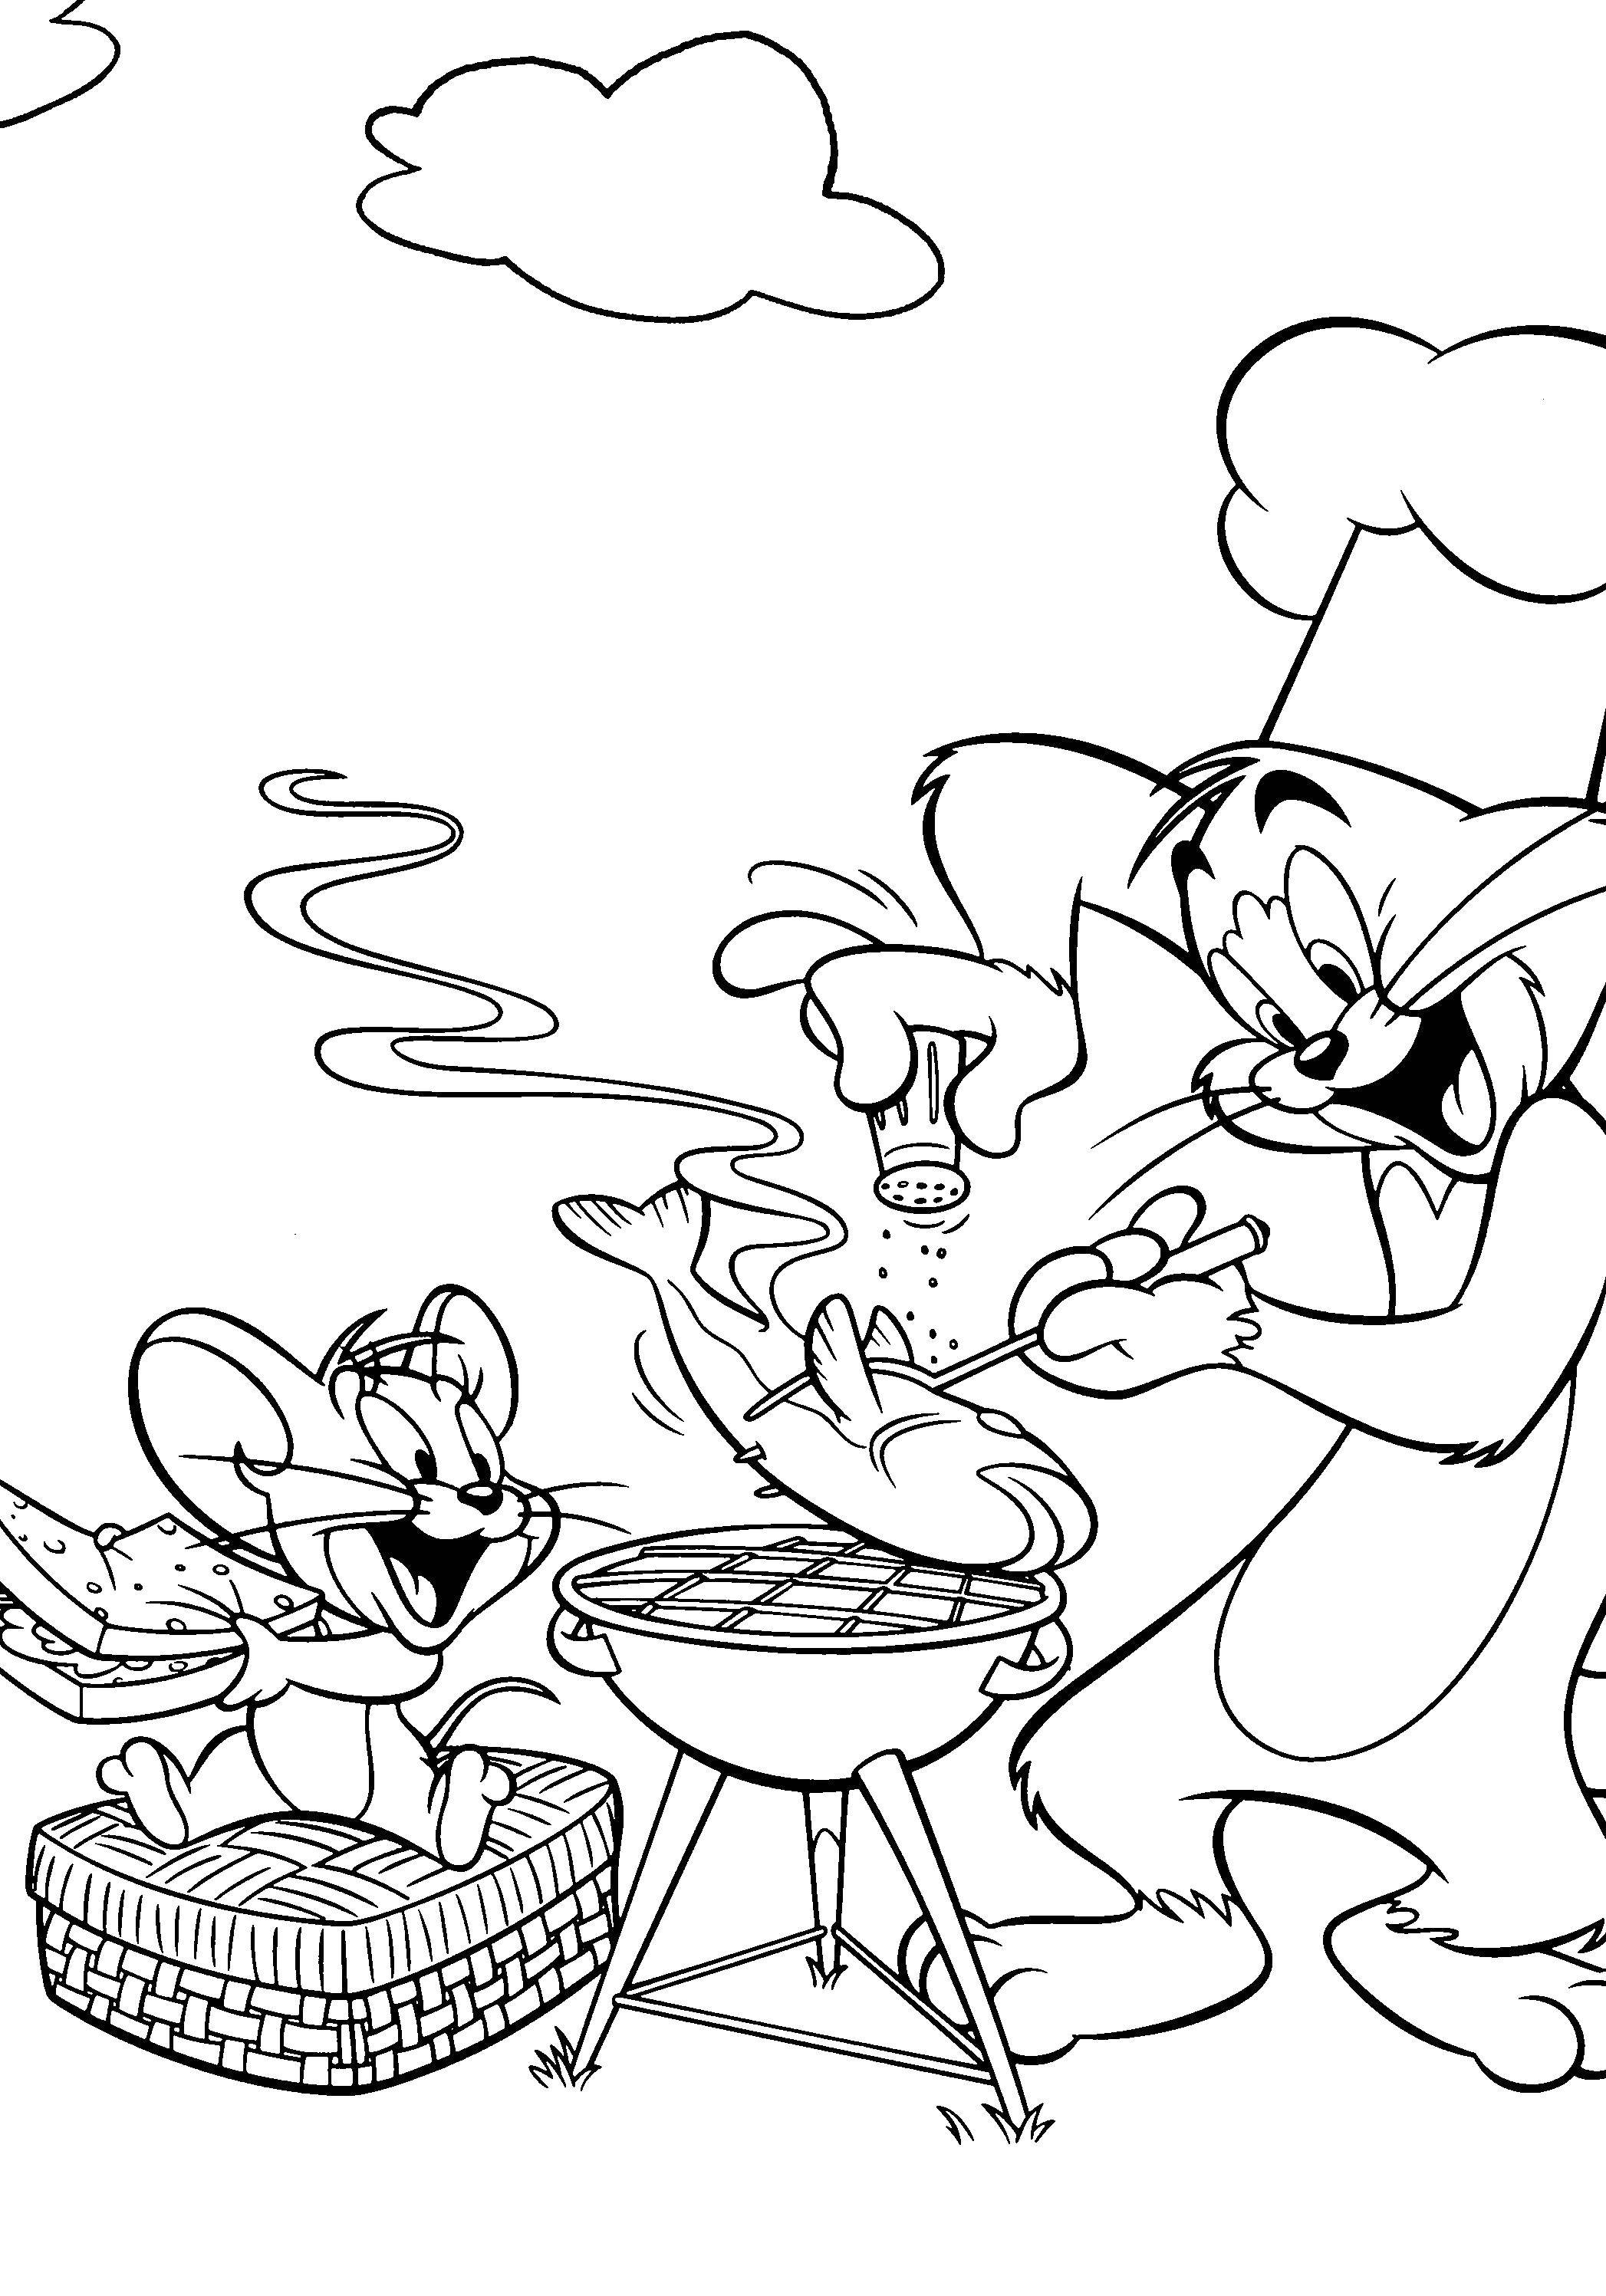 Coloring Tom and Jerry fish. Category Kitchen. Tags:  Cook, food.